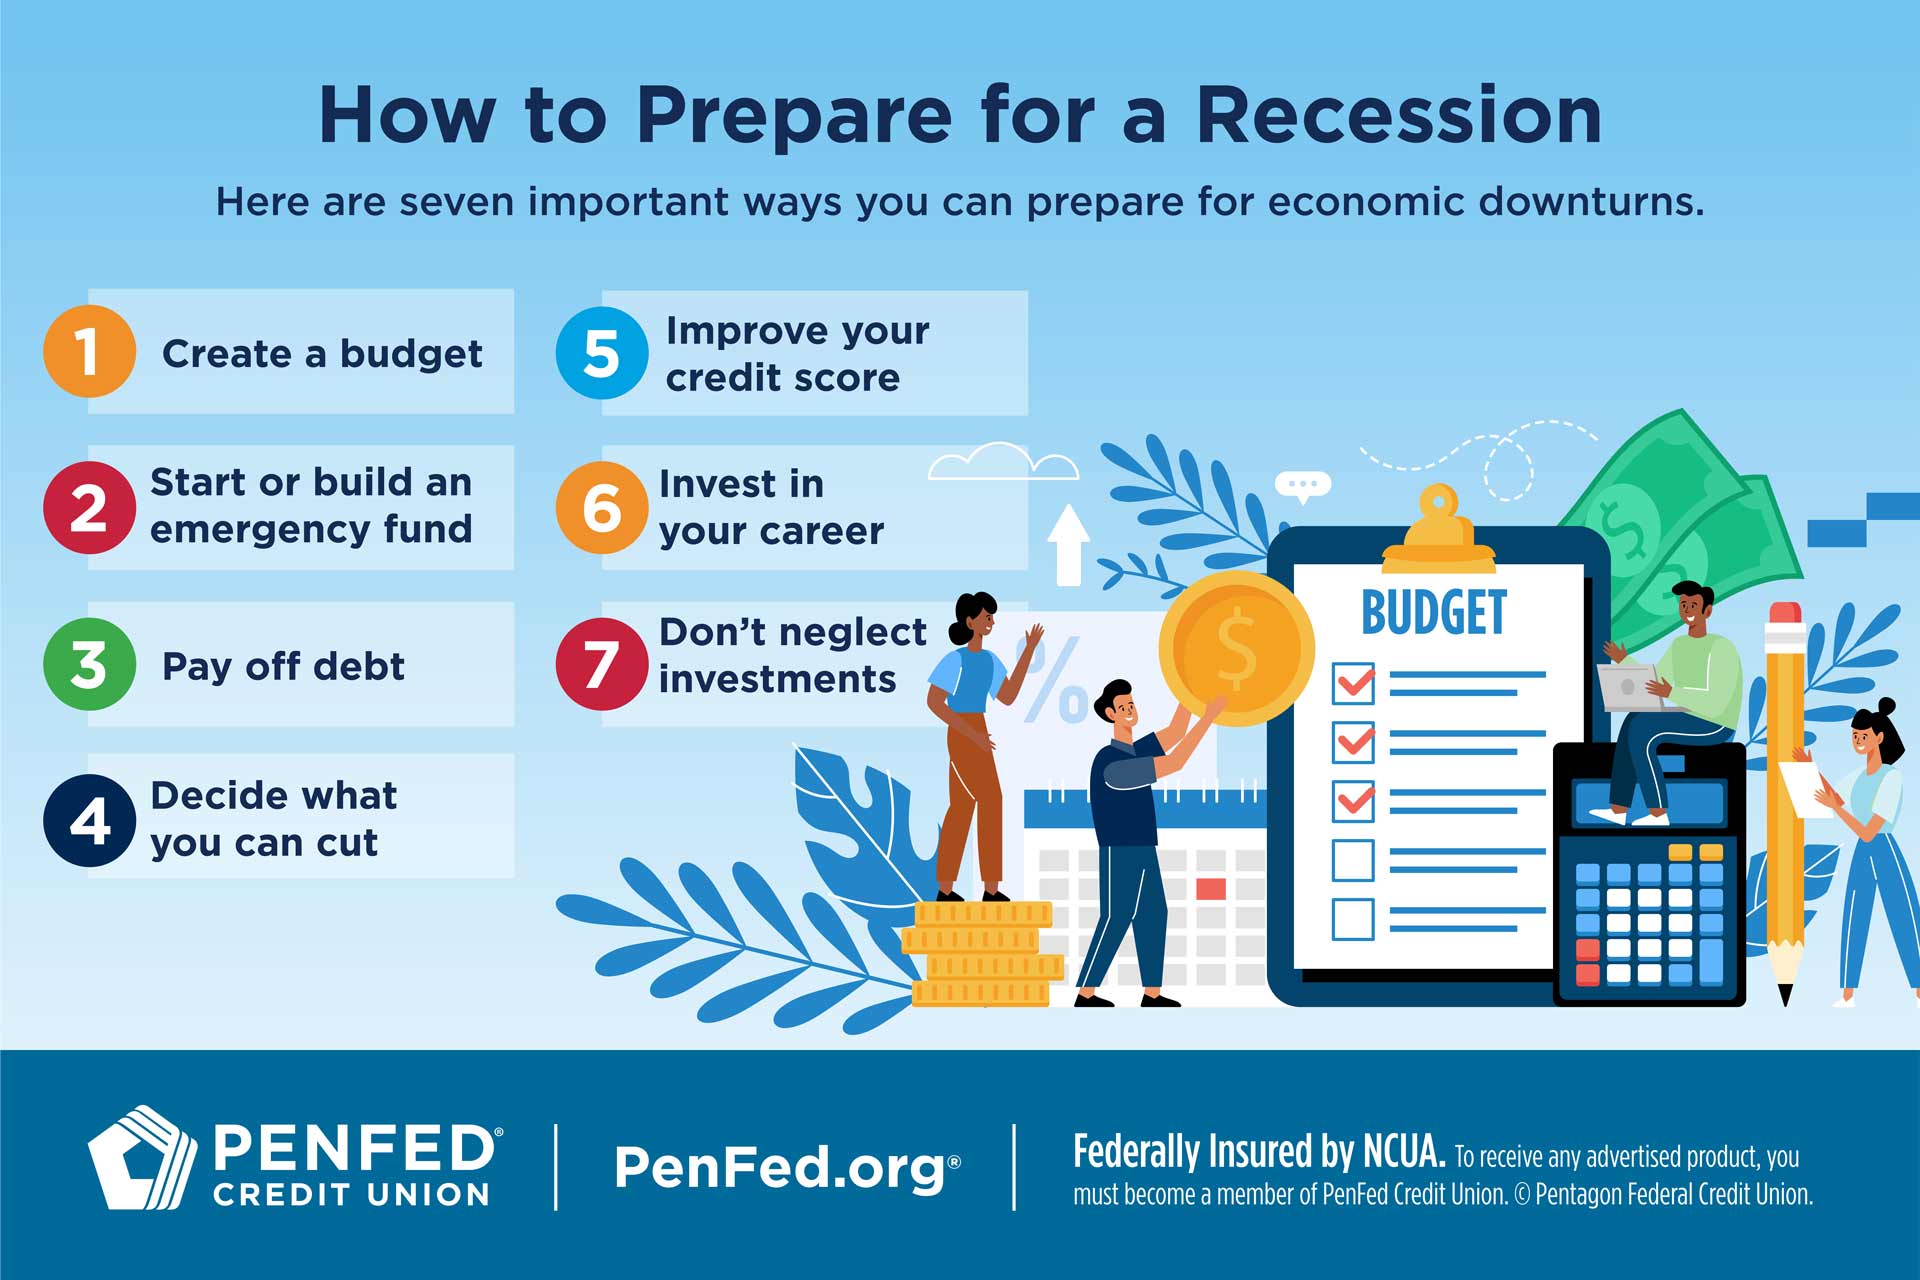 7 steps to prepare for a recession